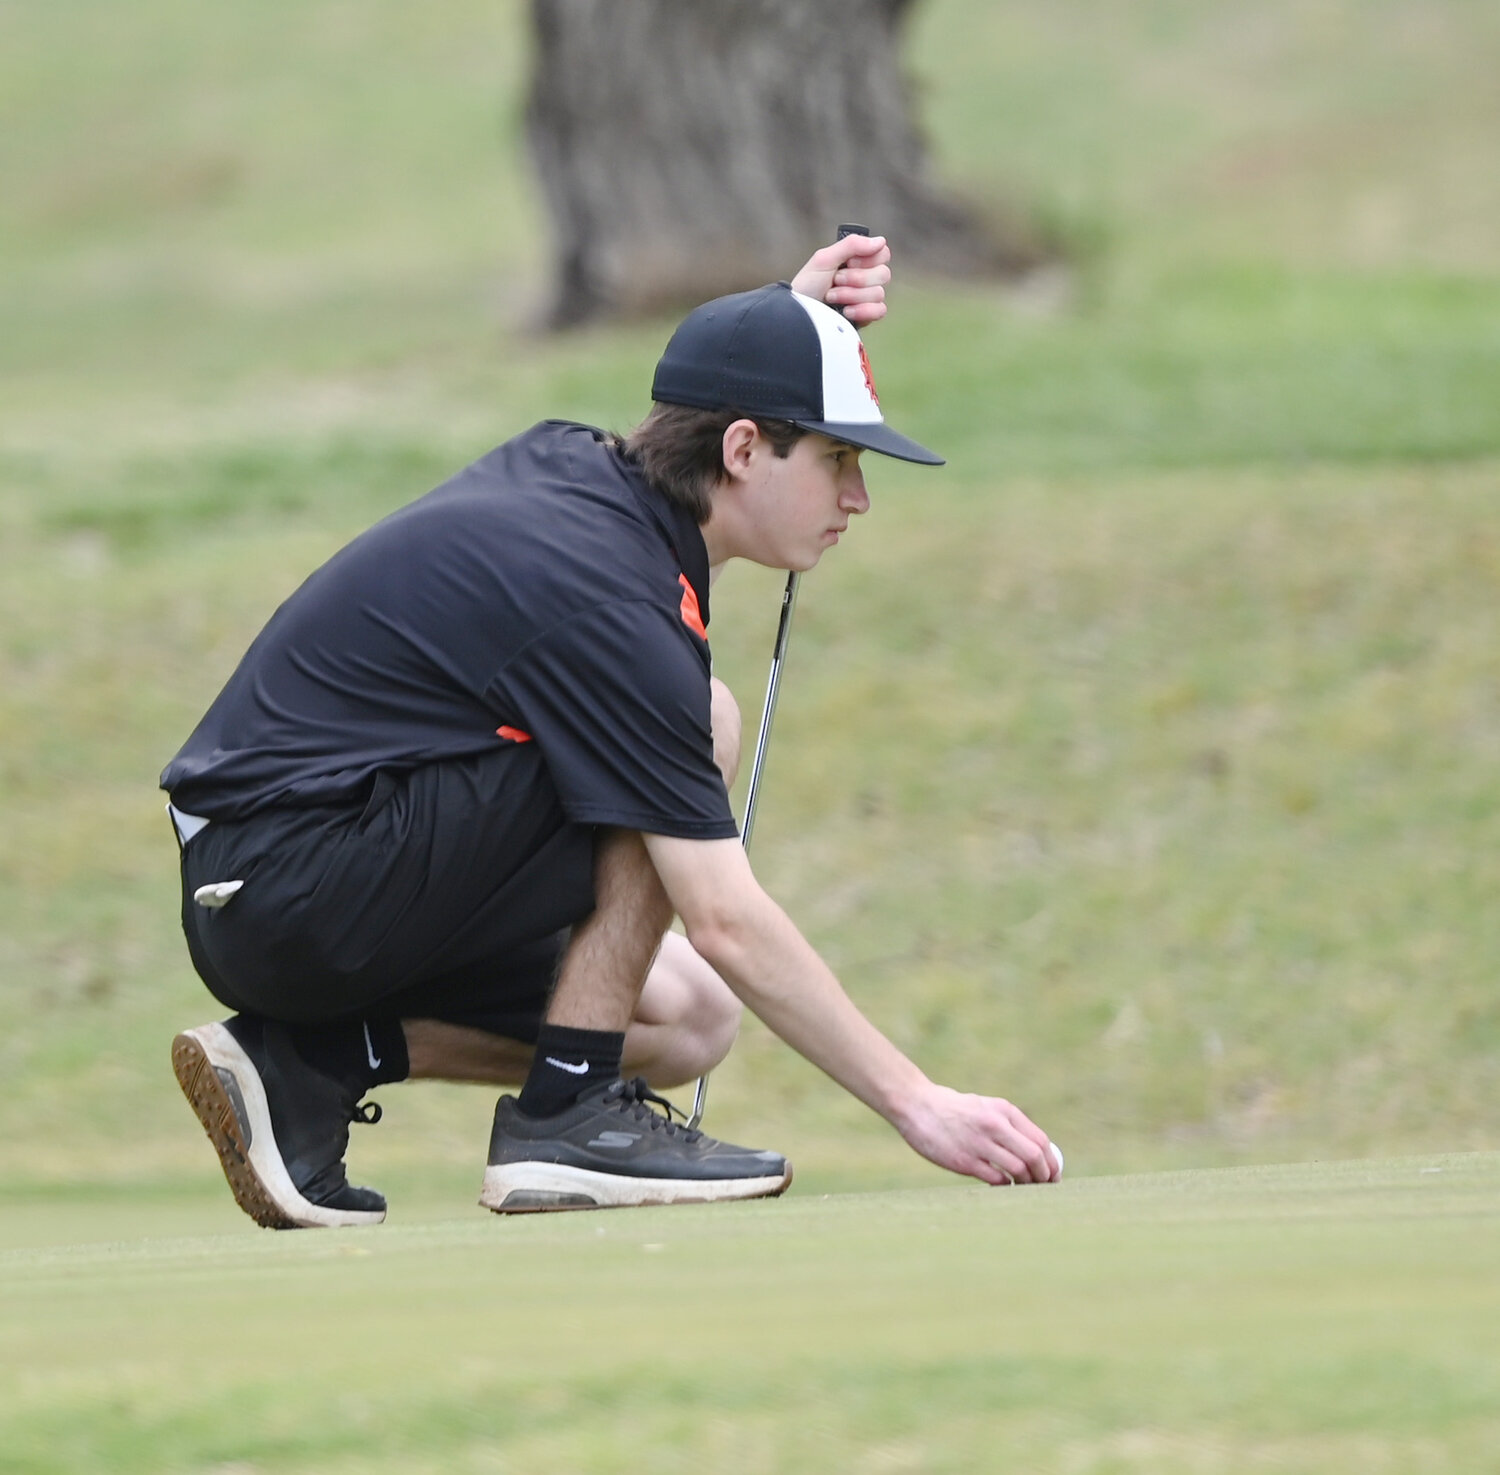 Lexington sophomore Jhett Skaggs eyes his putt on hole No. 8 during the Regional golf tournament at Brent Bruehl Memorial Golf Course on Monday. Skaggs shot 94-91 for a two-round total of 185.